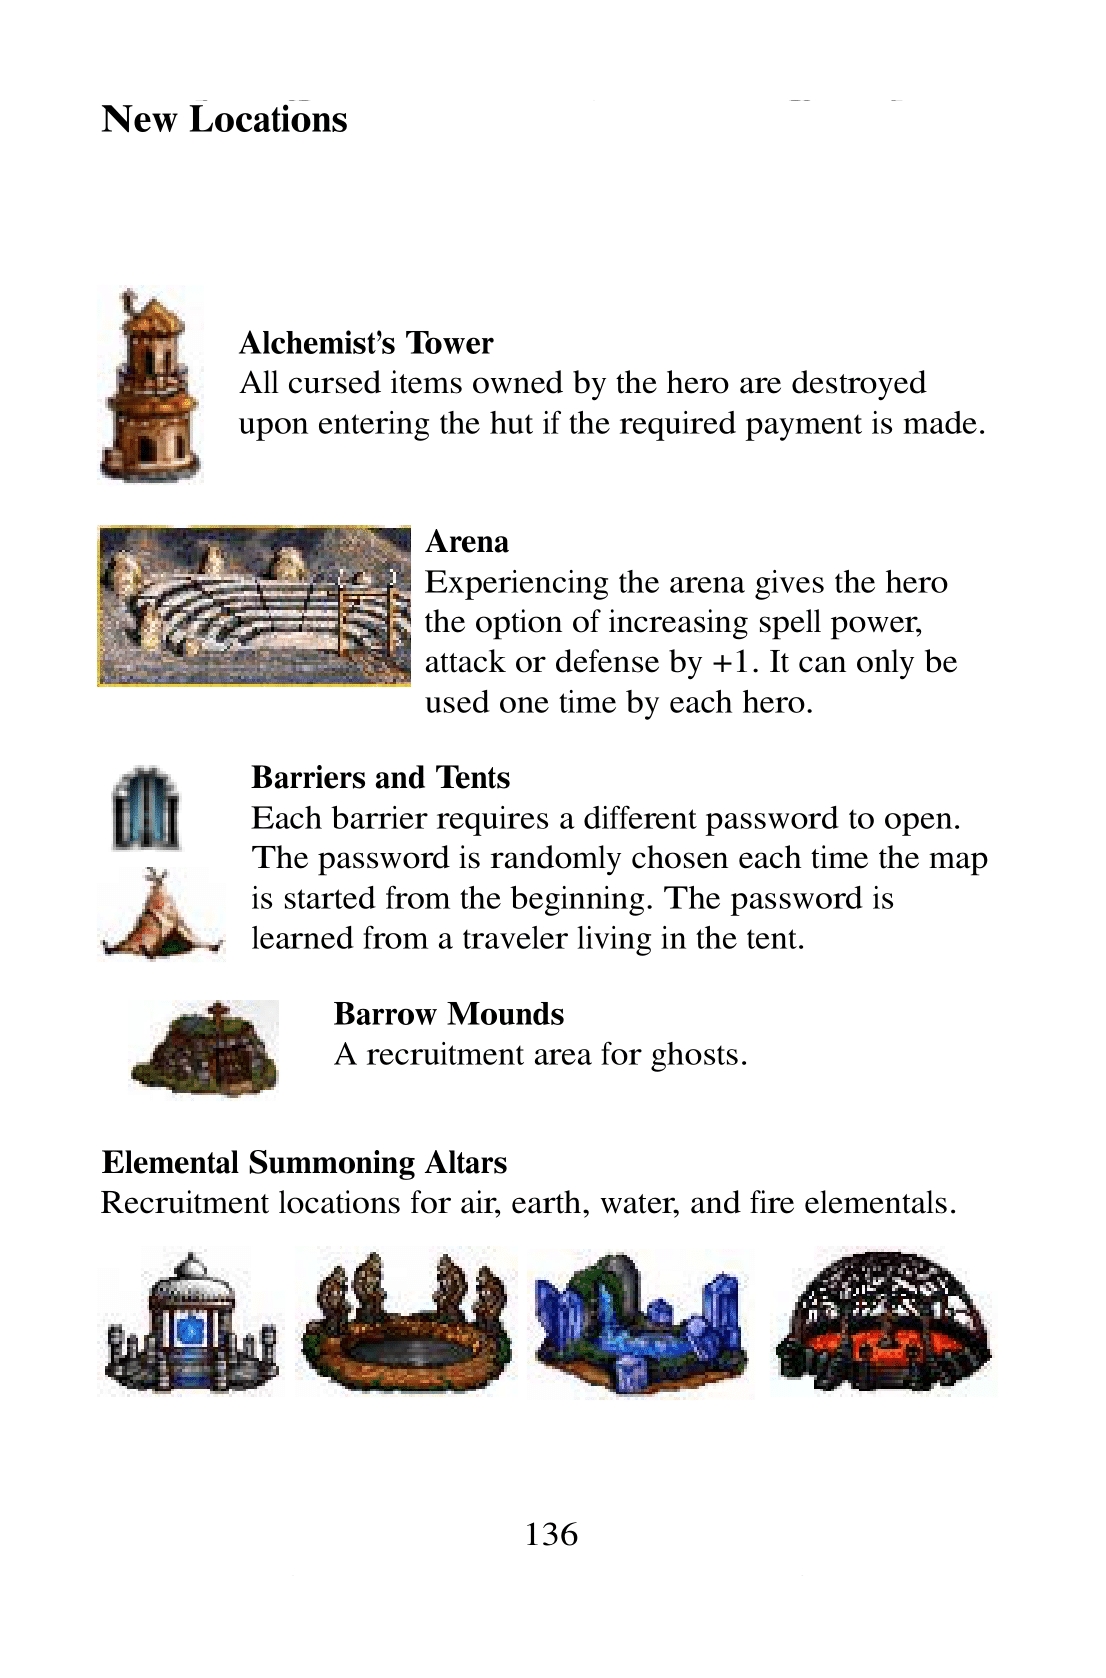 Heroes of Might and Magic II: Gold - game manual 136